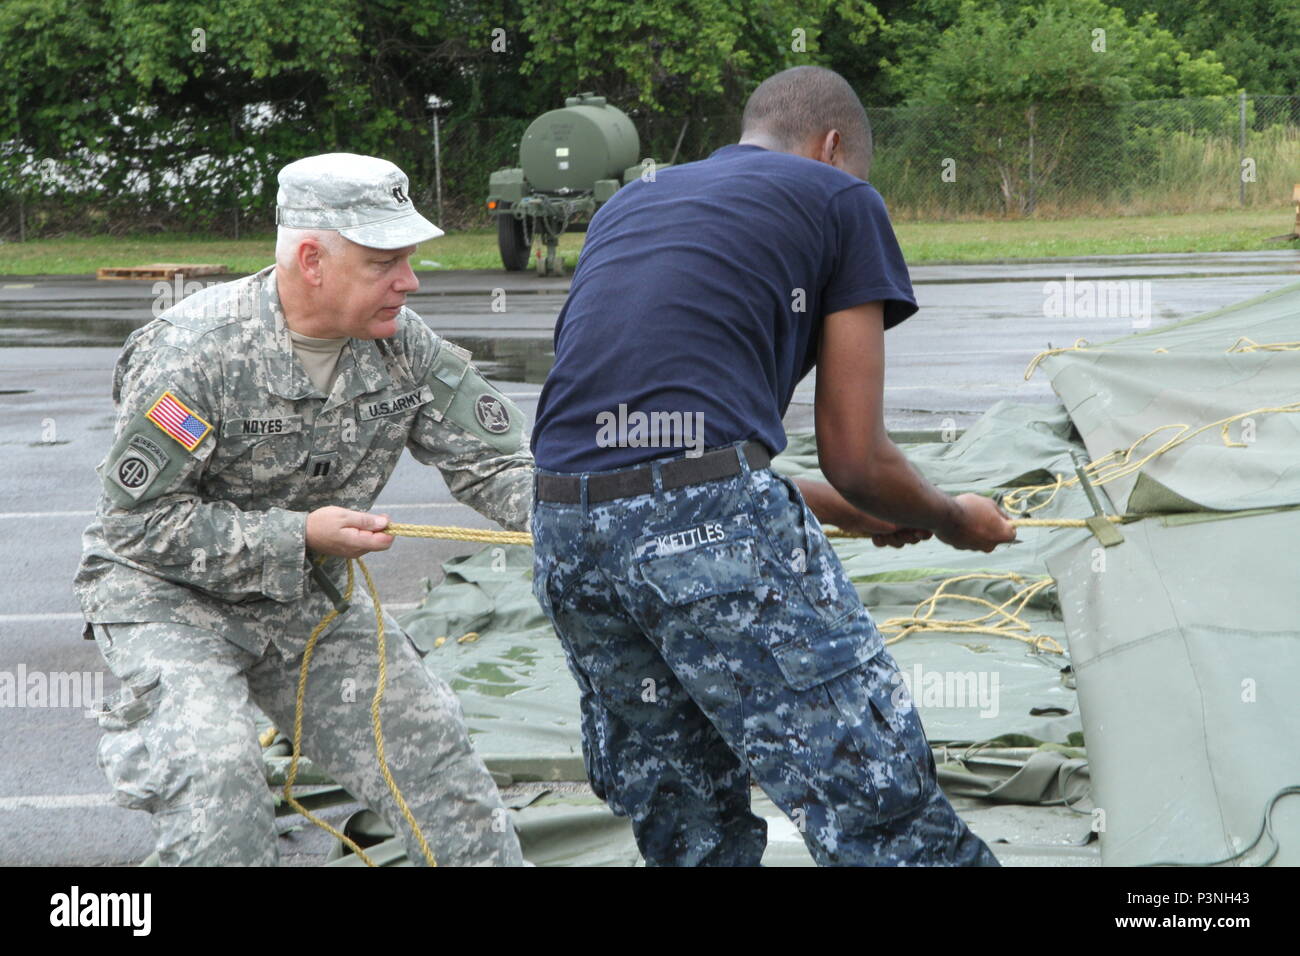 Service members from both the Army and the Navy help to set up tents for veterinary services during Healthy Cortland July 14, 2016. Healthy Cortland is one of the Innovative Readiness Training missions which provides real-world training in a joint civil-military environment while delivering world-class medical care to the people of Cortland, N.Y., from July 15-24. Stock Photo